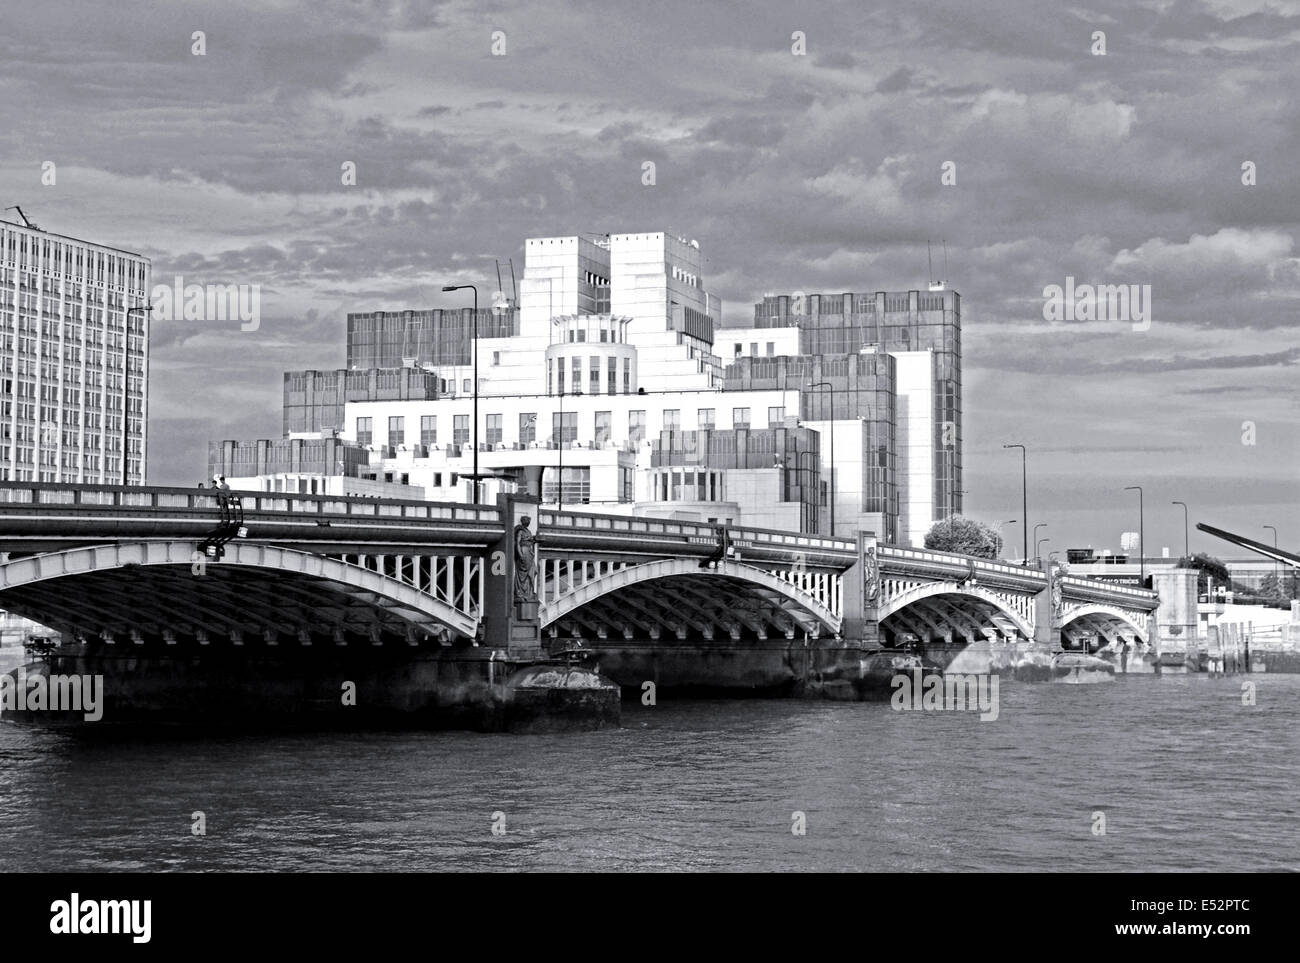 View of the headquarters of the British Secret Intelligence Service (SIS) also known as MI6 showing the River Thames, London, UK Stock Photo